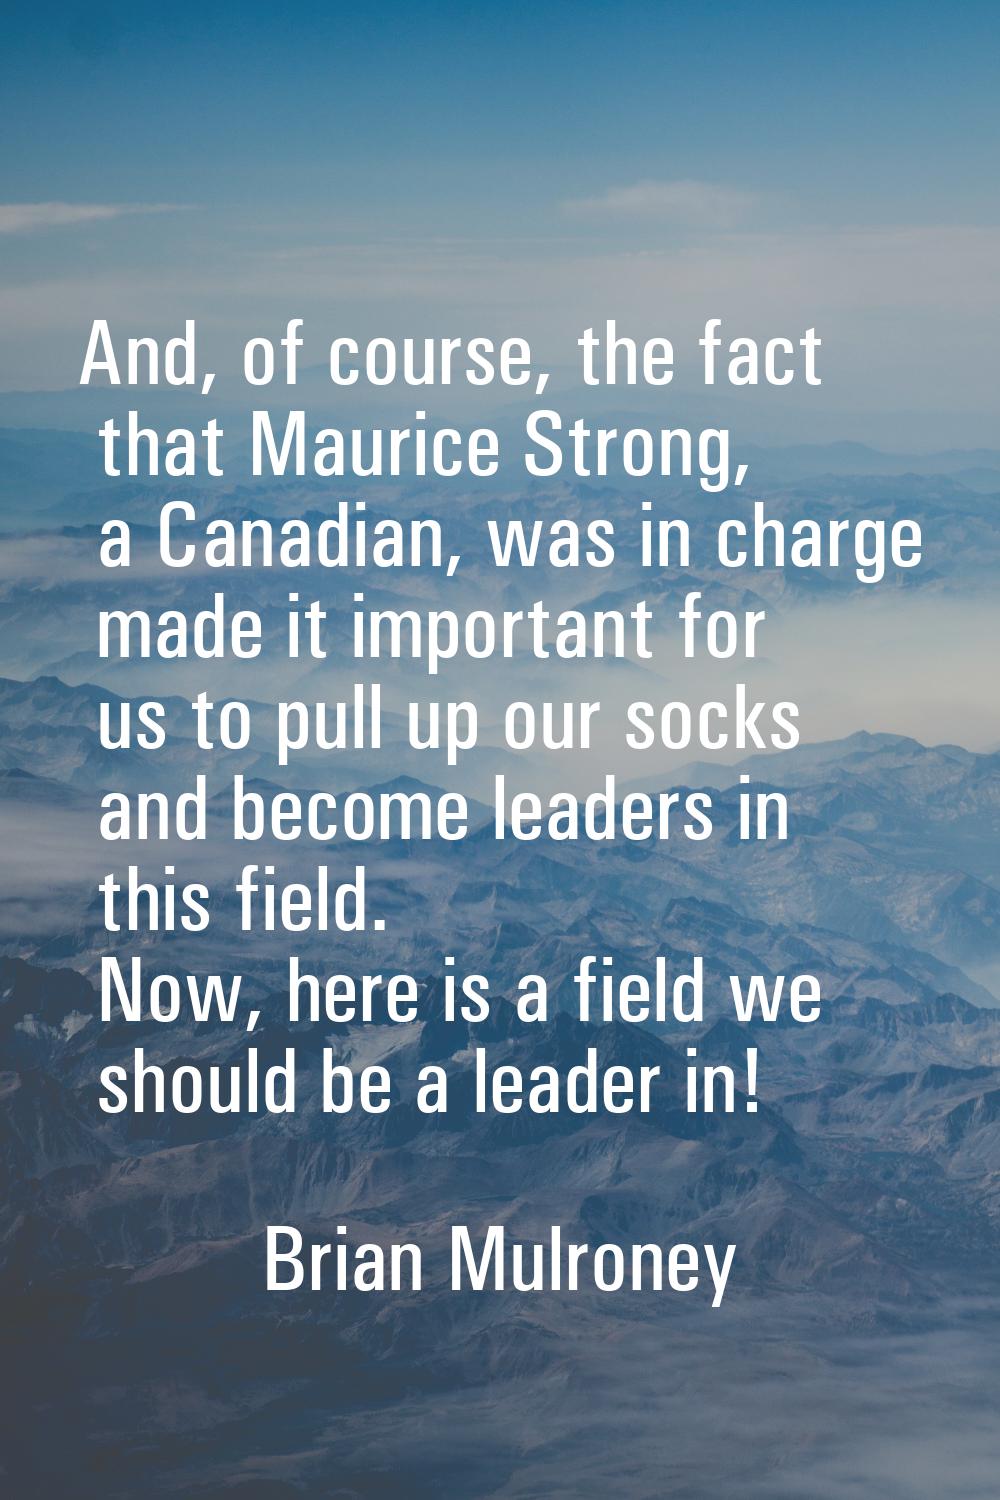 And, of course, the fact that Maurice Strong, a Canadian, was in charge made it important for us to